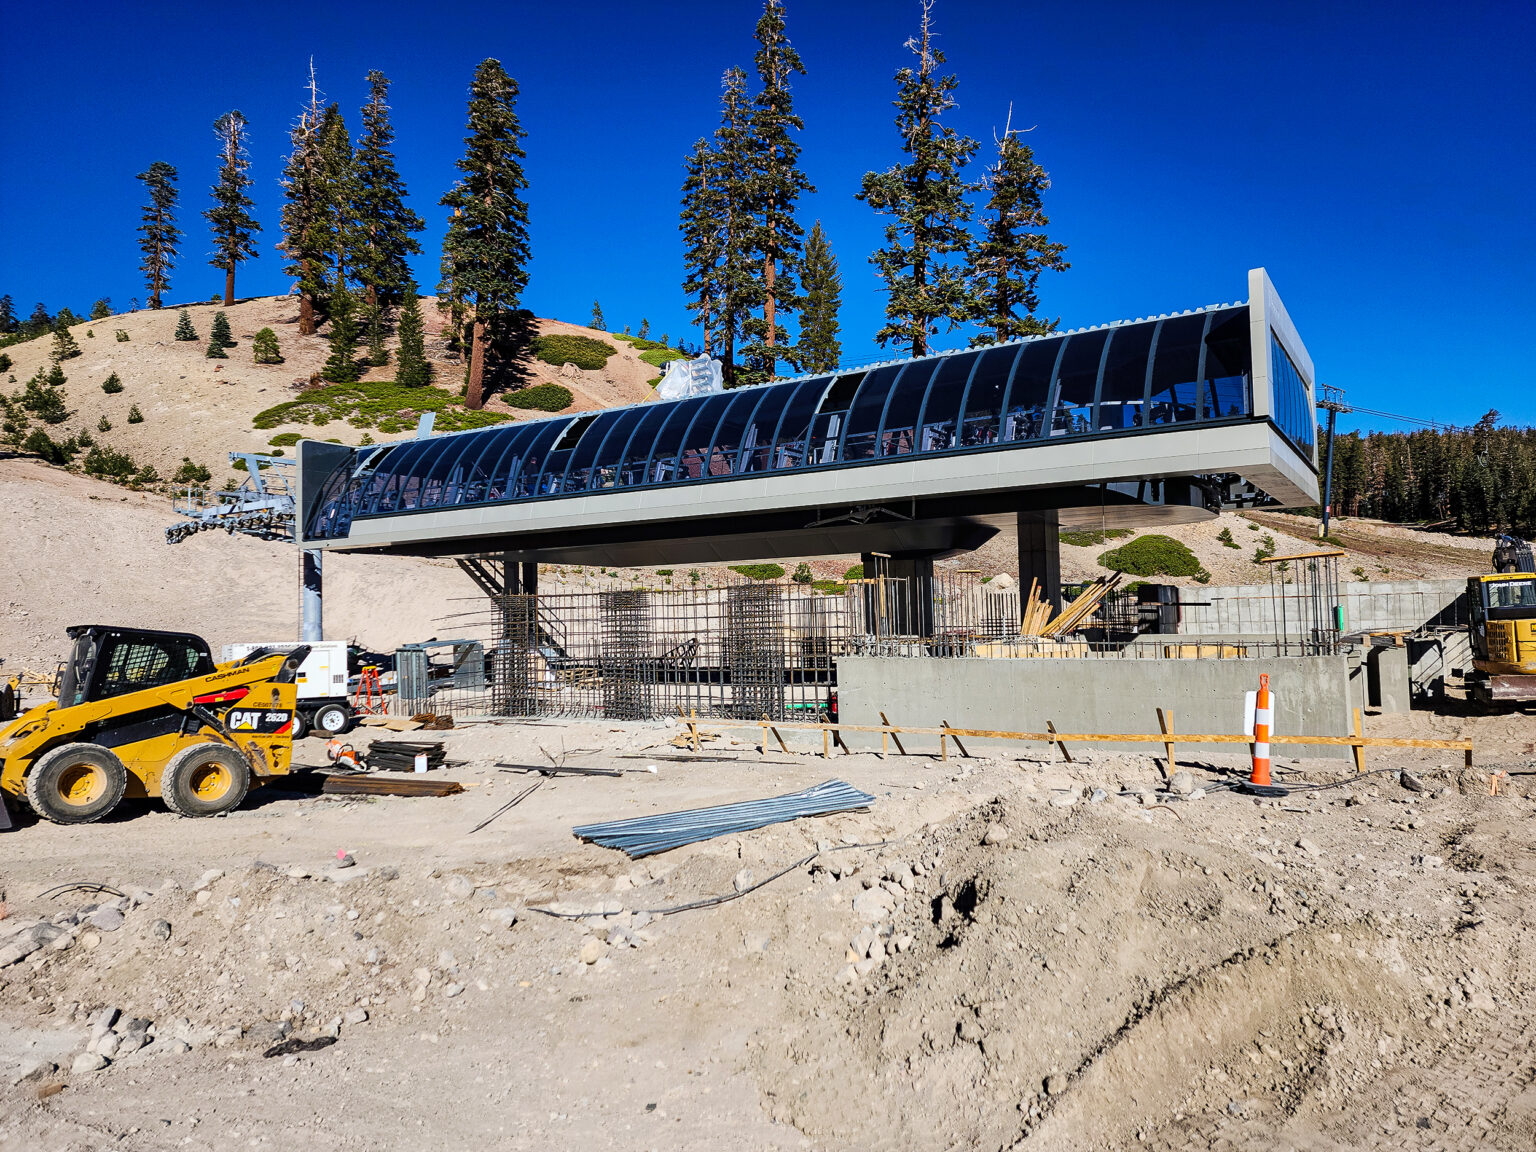 New Bottom Station of Chair 16 at the Mammoth Mountain Ski Area - Photo Steve Taylor